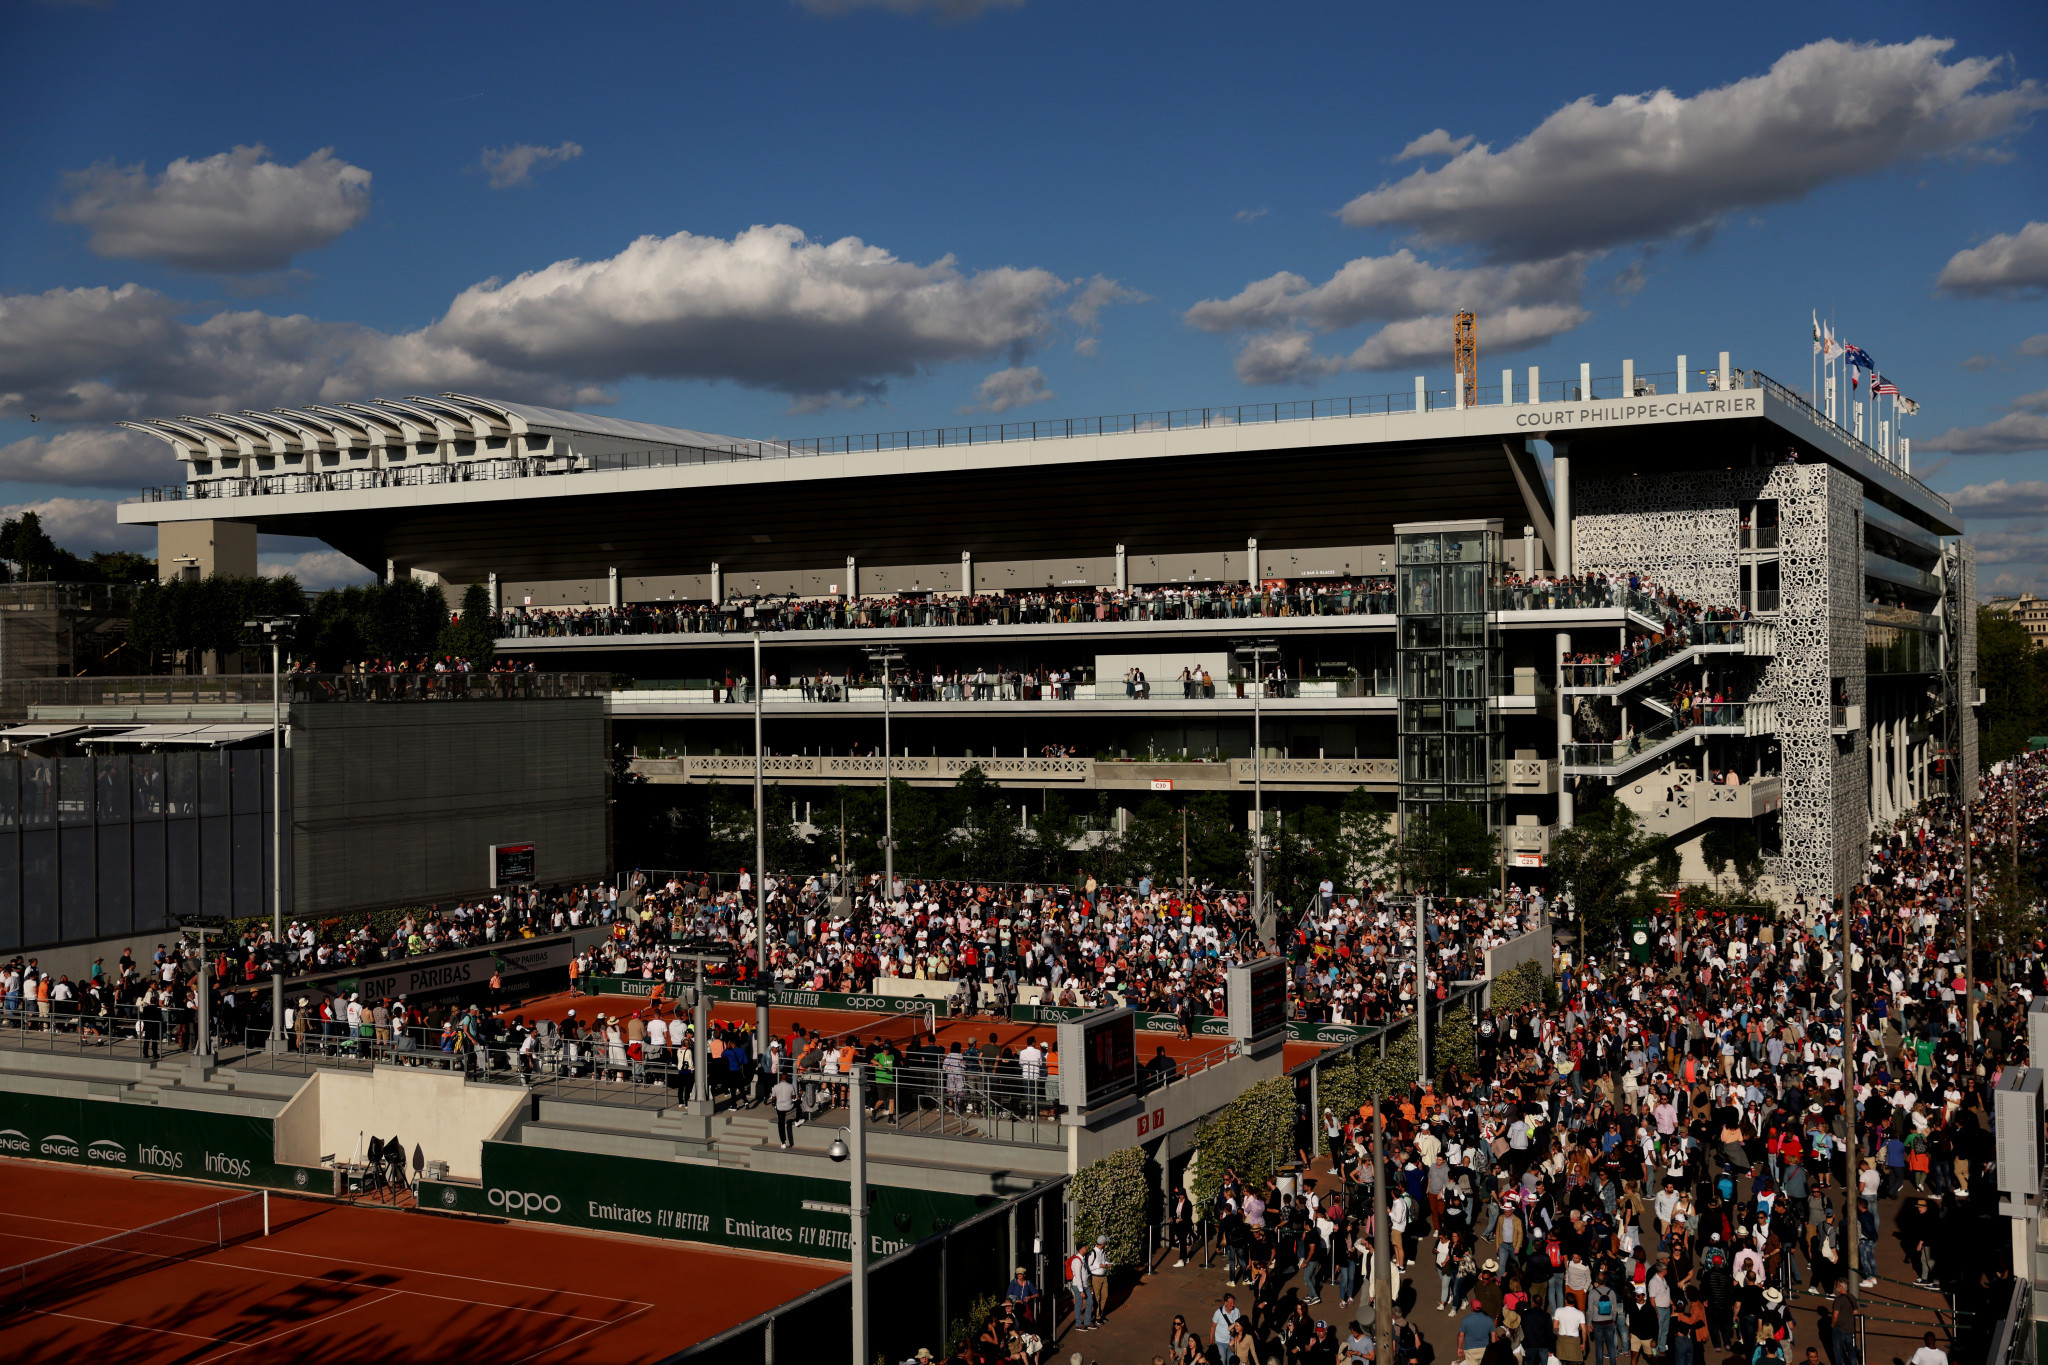 Capacity crowds are a welcome sight at Roland Garros for this year's edition ©Getty Images